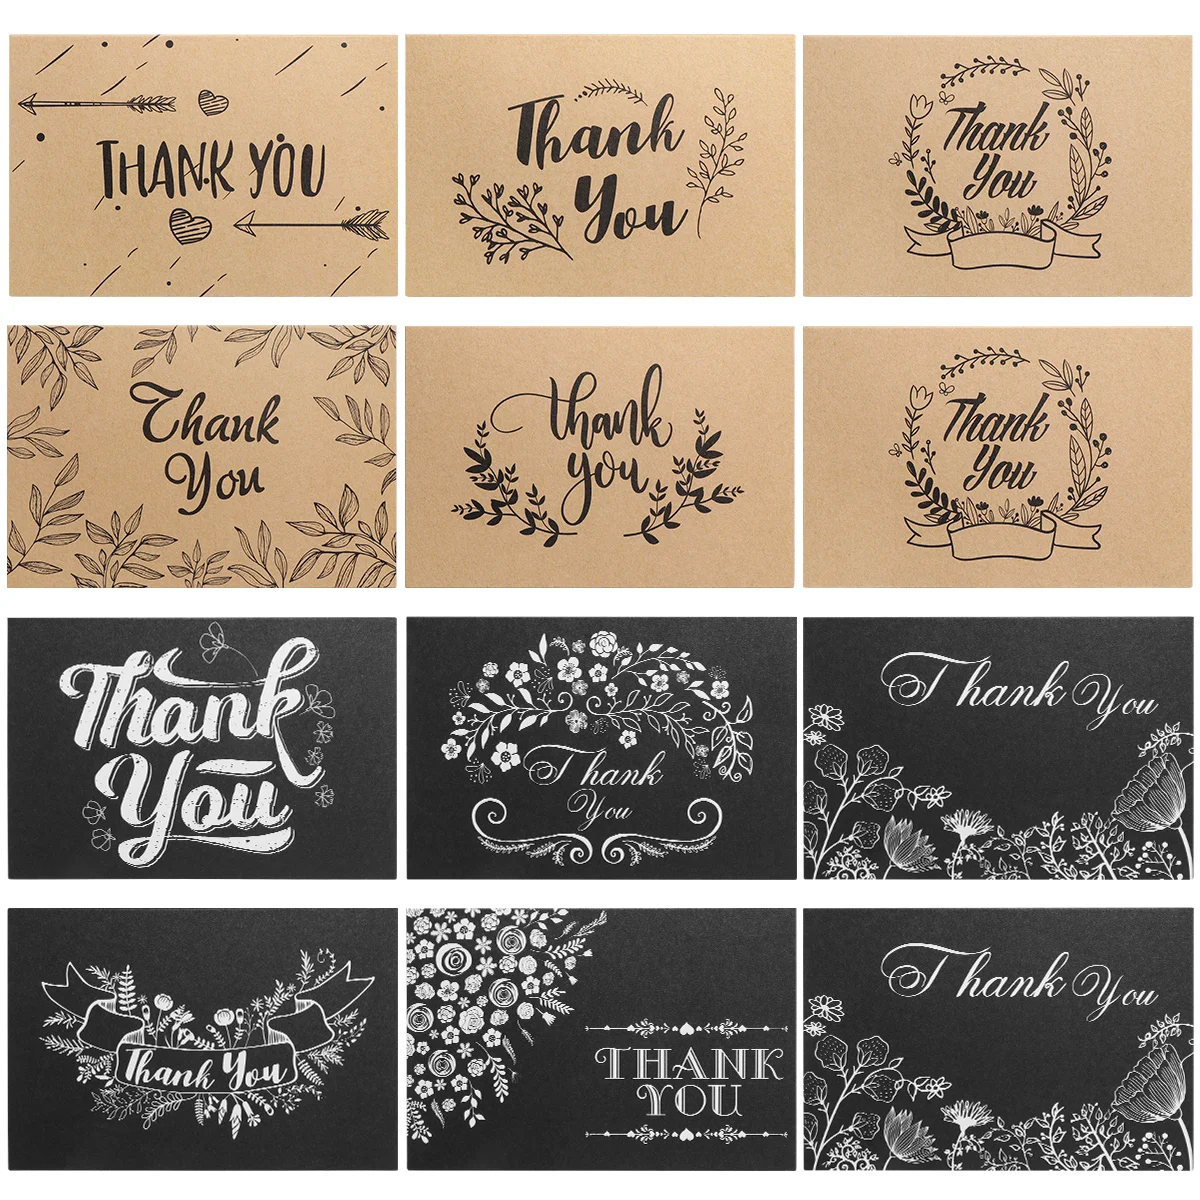 Cards Paper Greeting Cards Thanksgiving Blank Thanks Notes Wish Cards Label Kraft Pack Envelopes 150 Sets